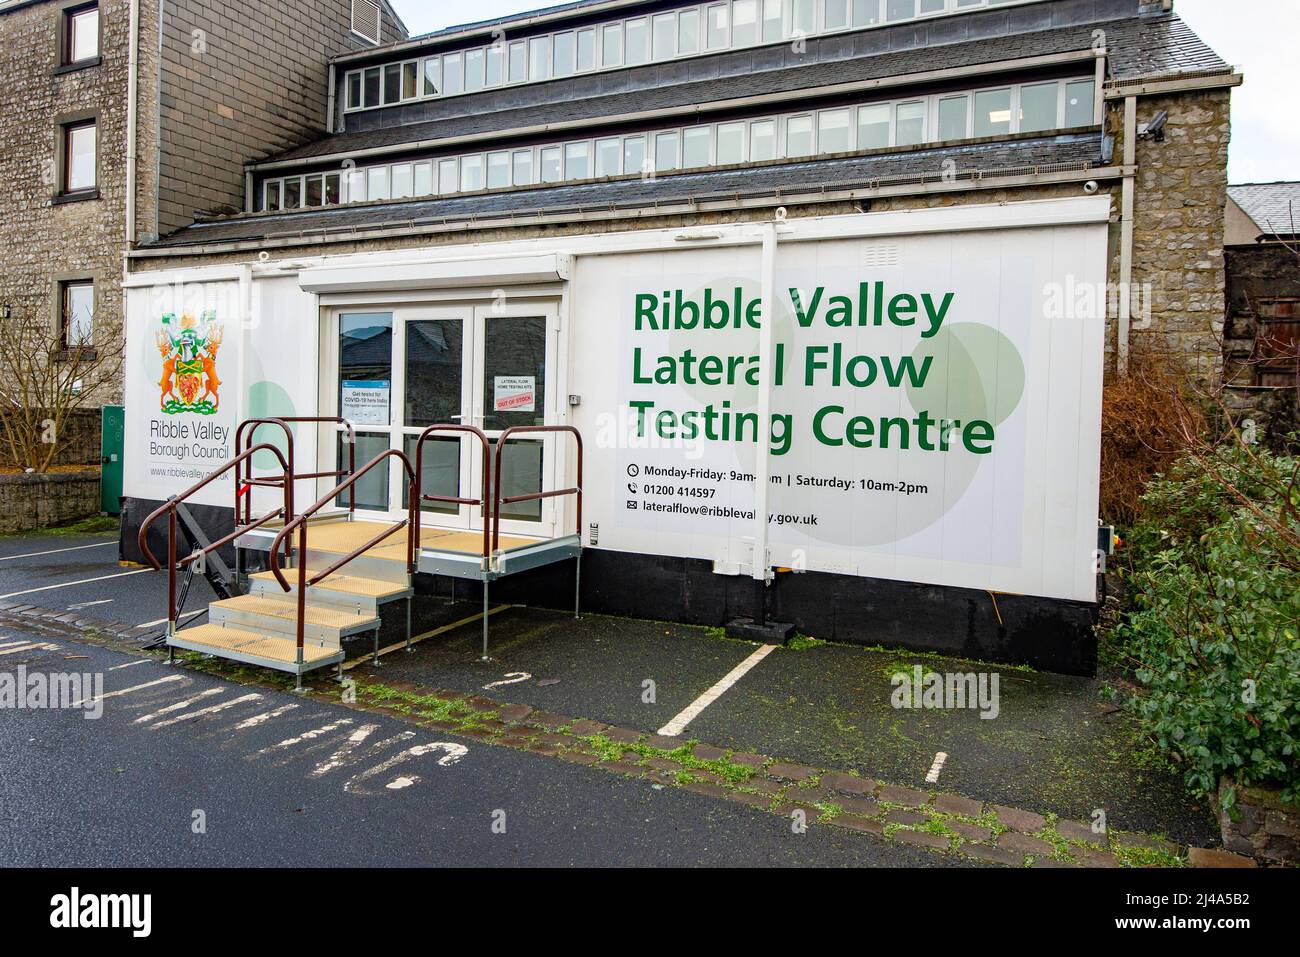 Ribble Valley Lateral Flow Testing Center, Clitheroe, Lancashire, Royaume-Uni. Banque D'Images